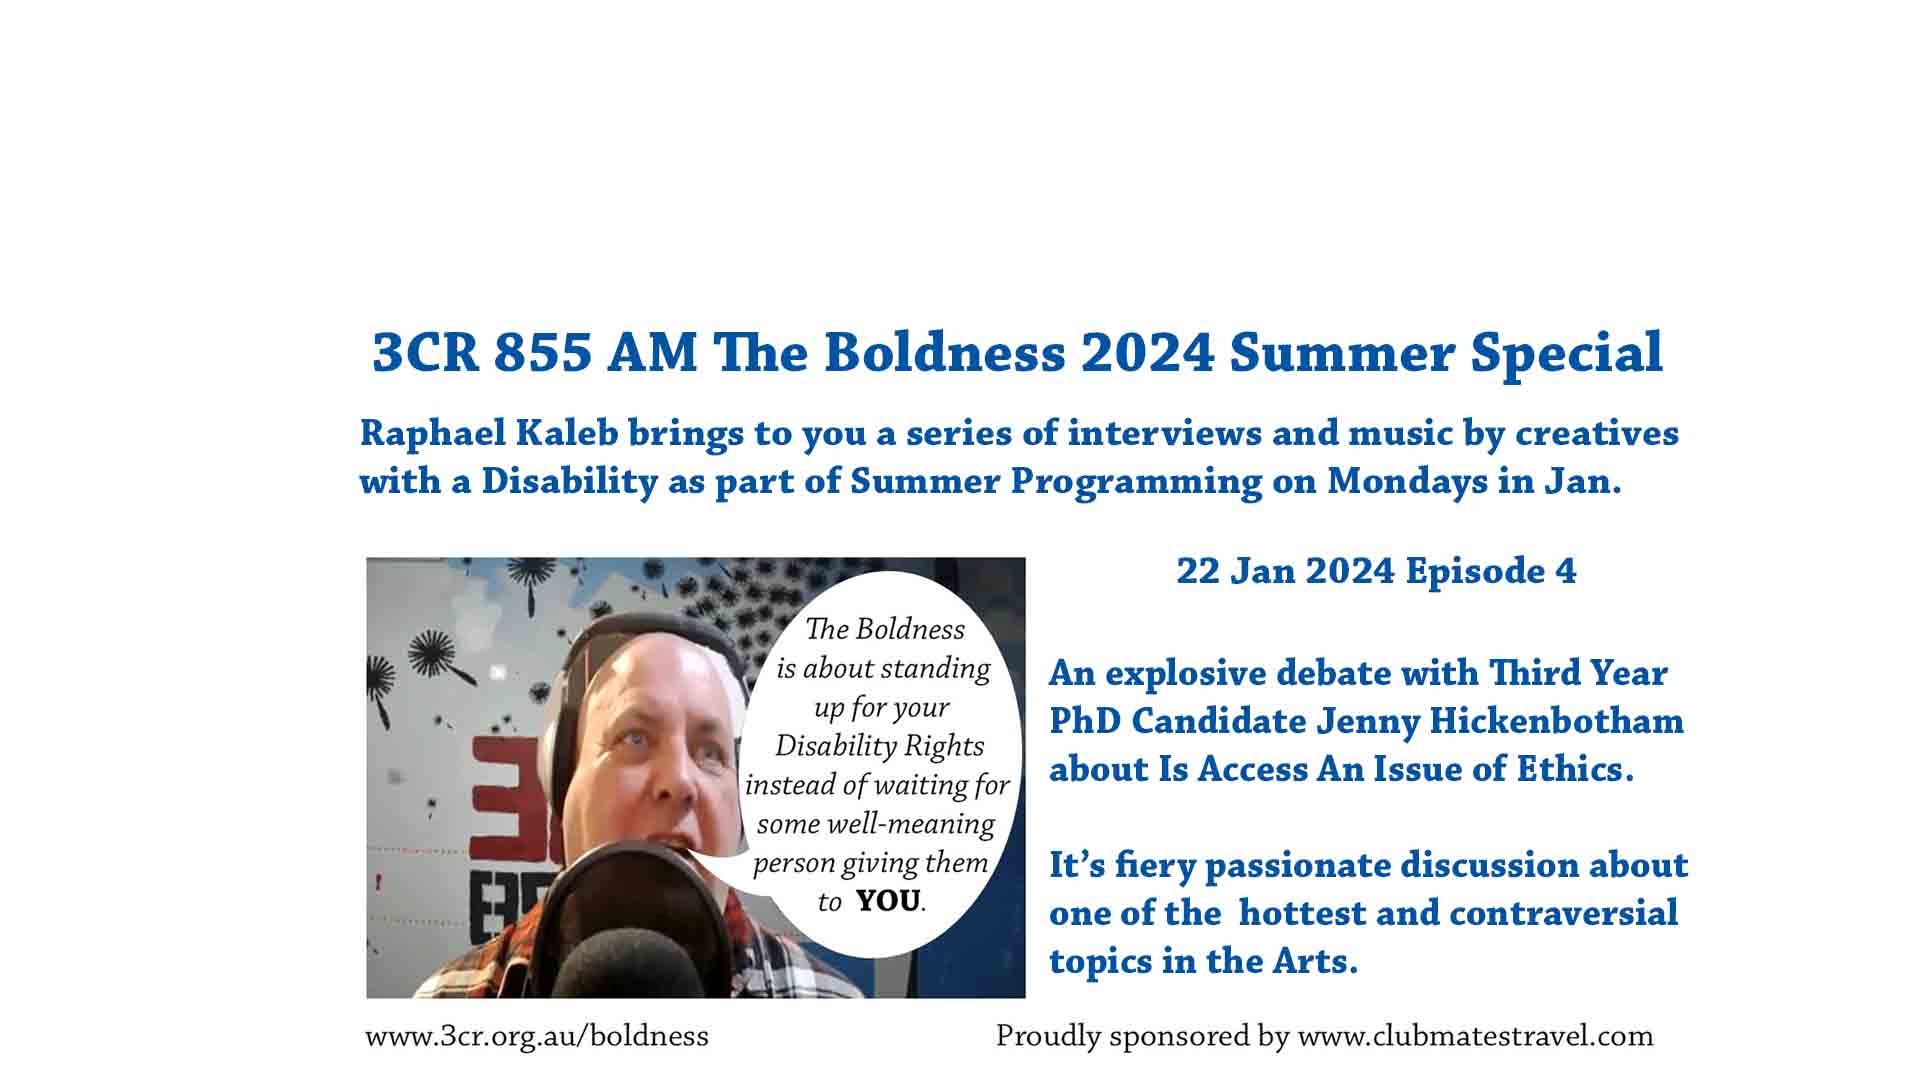 3CR 855 AM The Boldness - an explosive debate with Third Year PhD Candidate Jenny Hickenbotham on Is Access and Issue of Ethics.  It's a fiery, passionate discussion on one of the hot and controversial topics in The Arts 